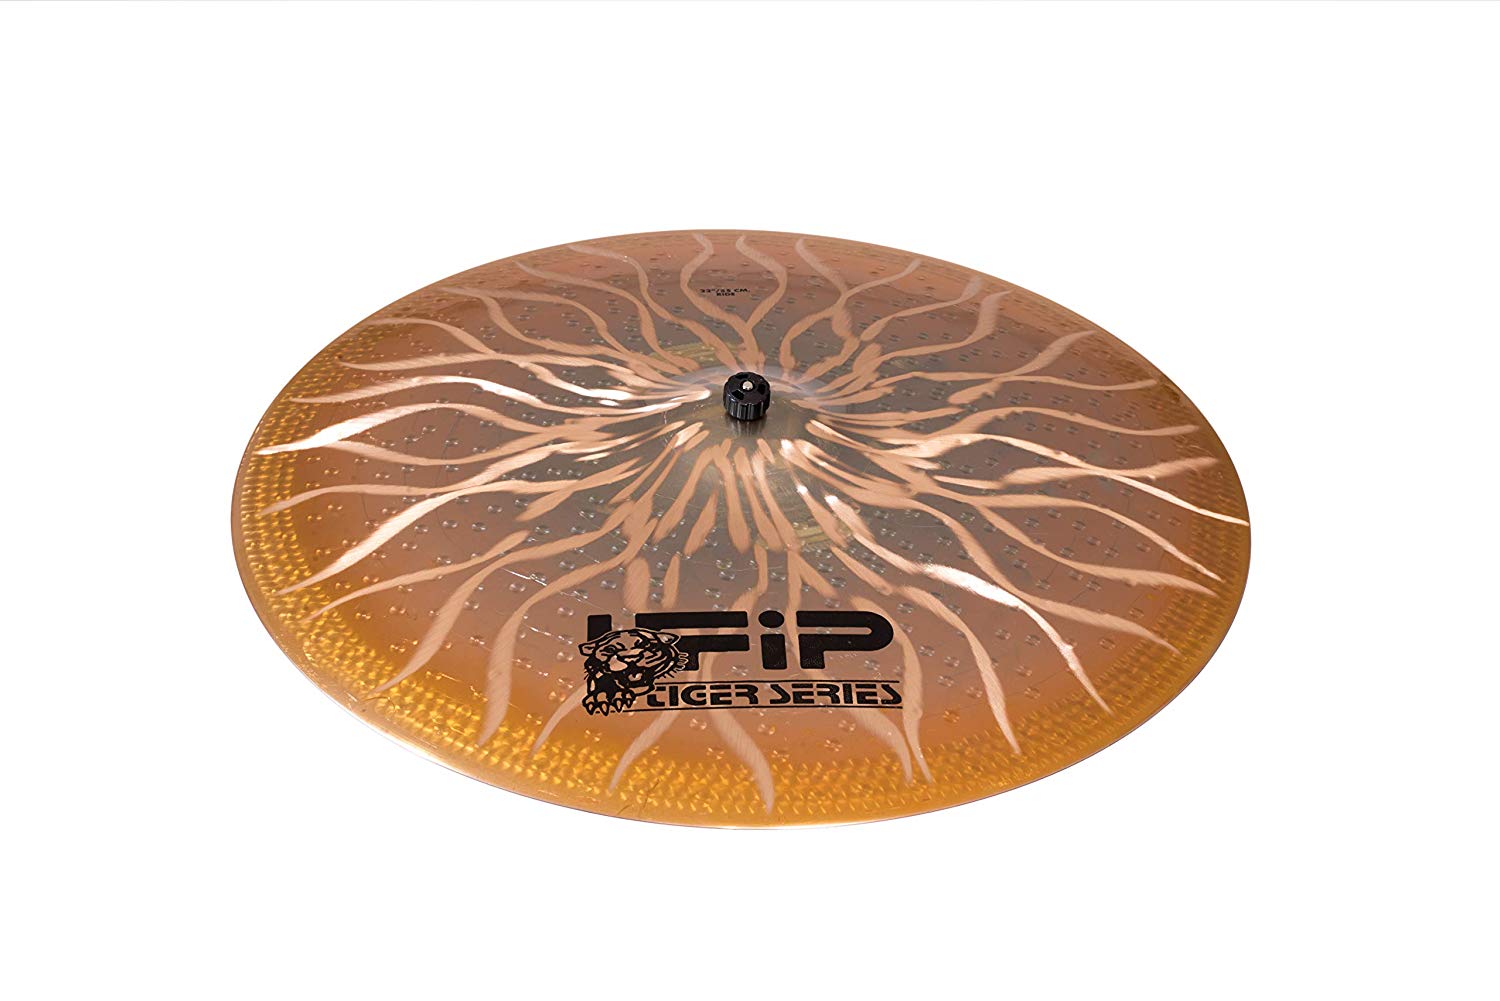 Ufip TS-22R Tiger Series 22" Ride Cymbal